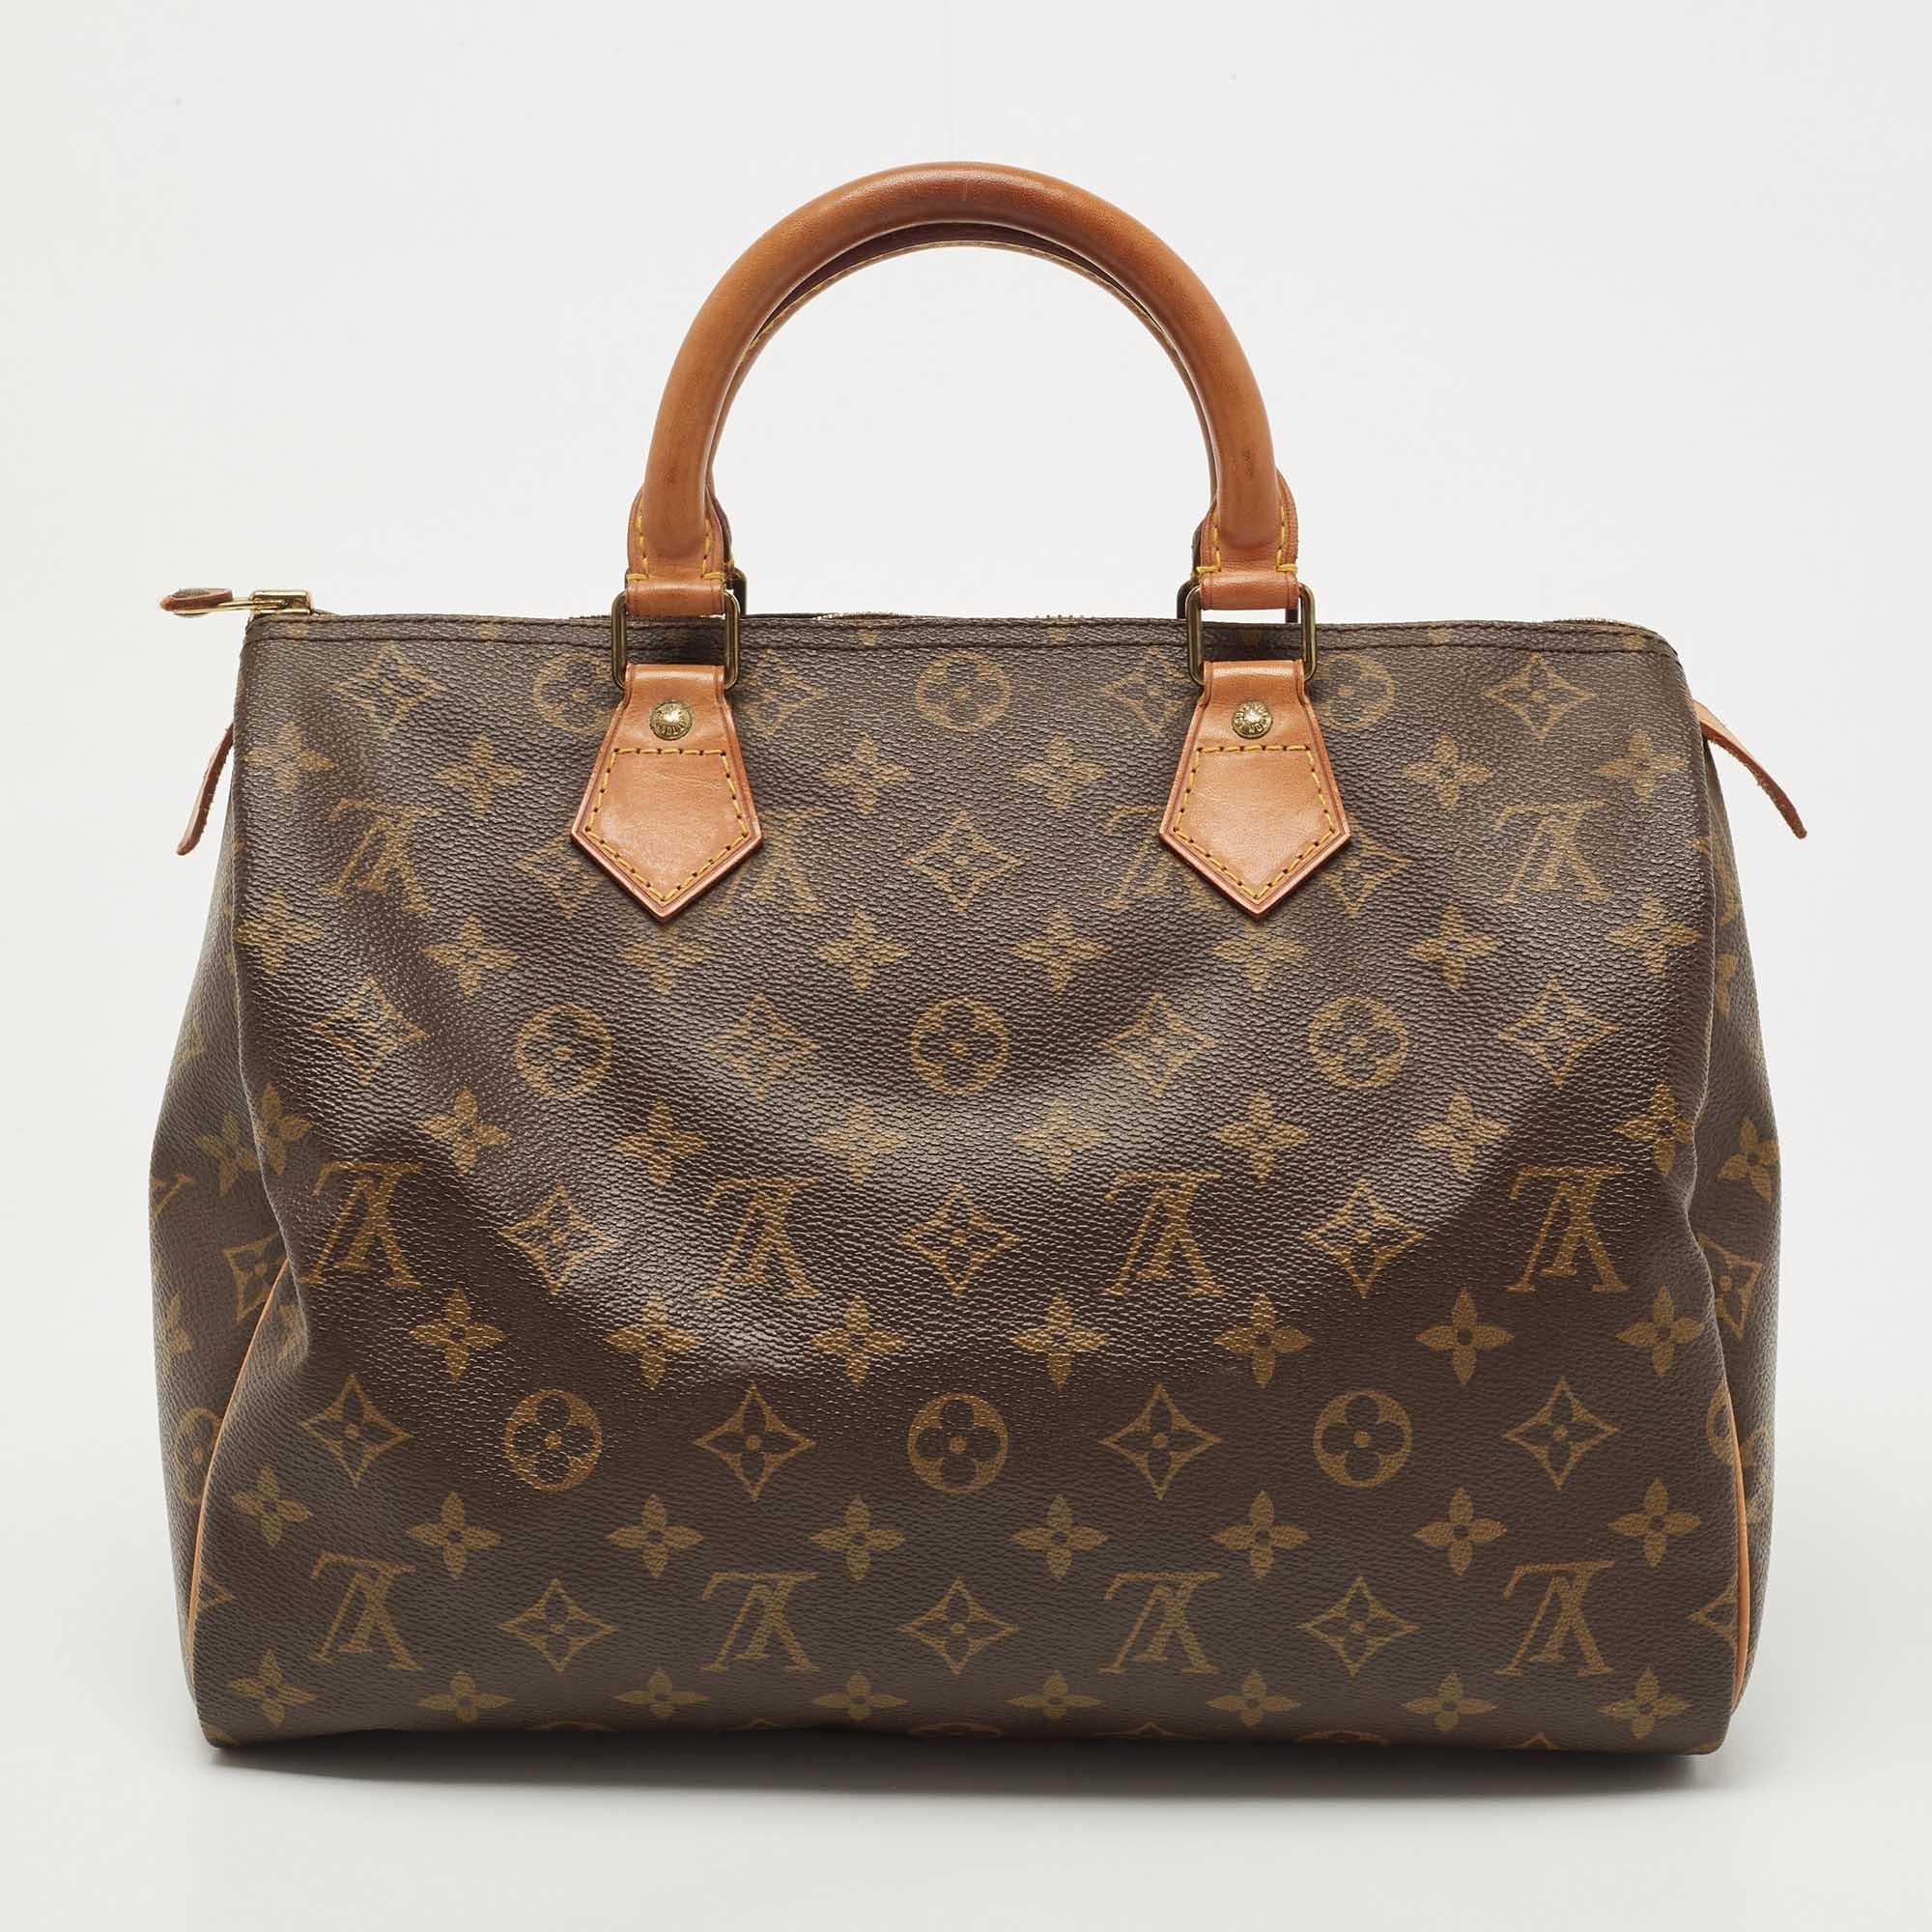 The iconic Speedy from Louis Vuitton was first created for everyday use as a smaller version of their famous Keepall bag. A true classic in shape and design, this Speedy is a buy you will love.

Includes: Dust bag and Card